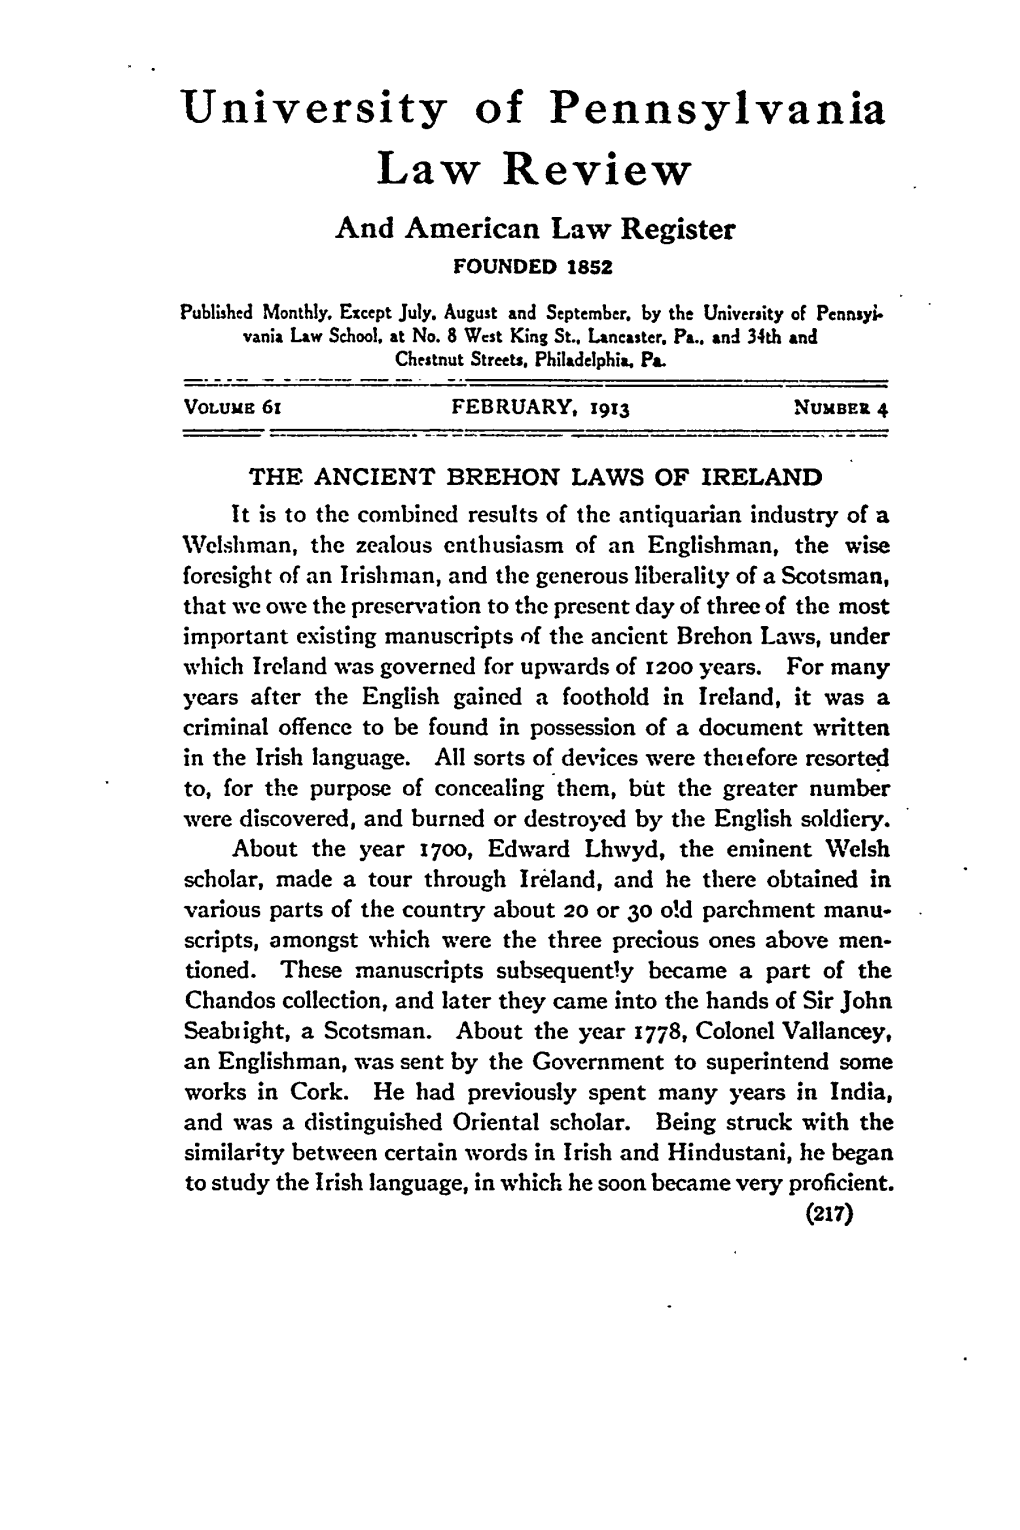 The Ancient Brehon Laws of Ireland